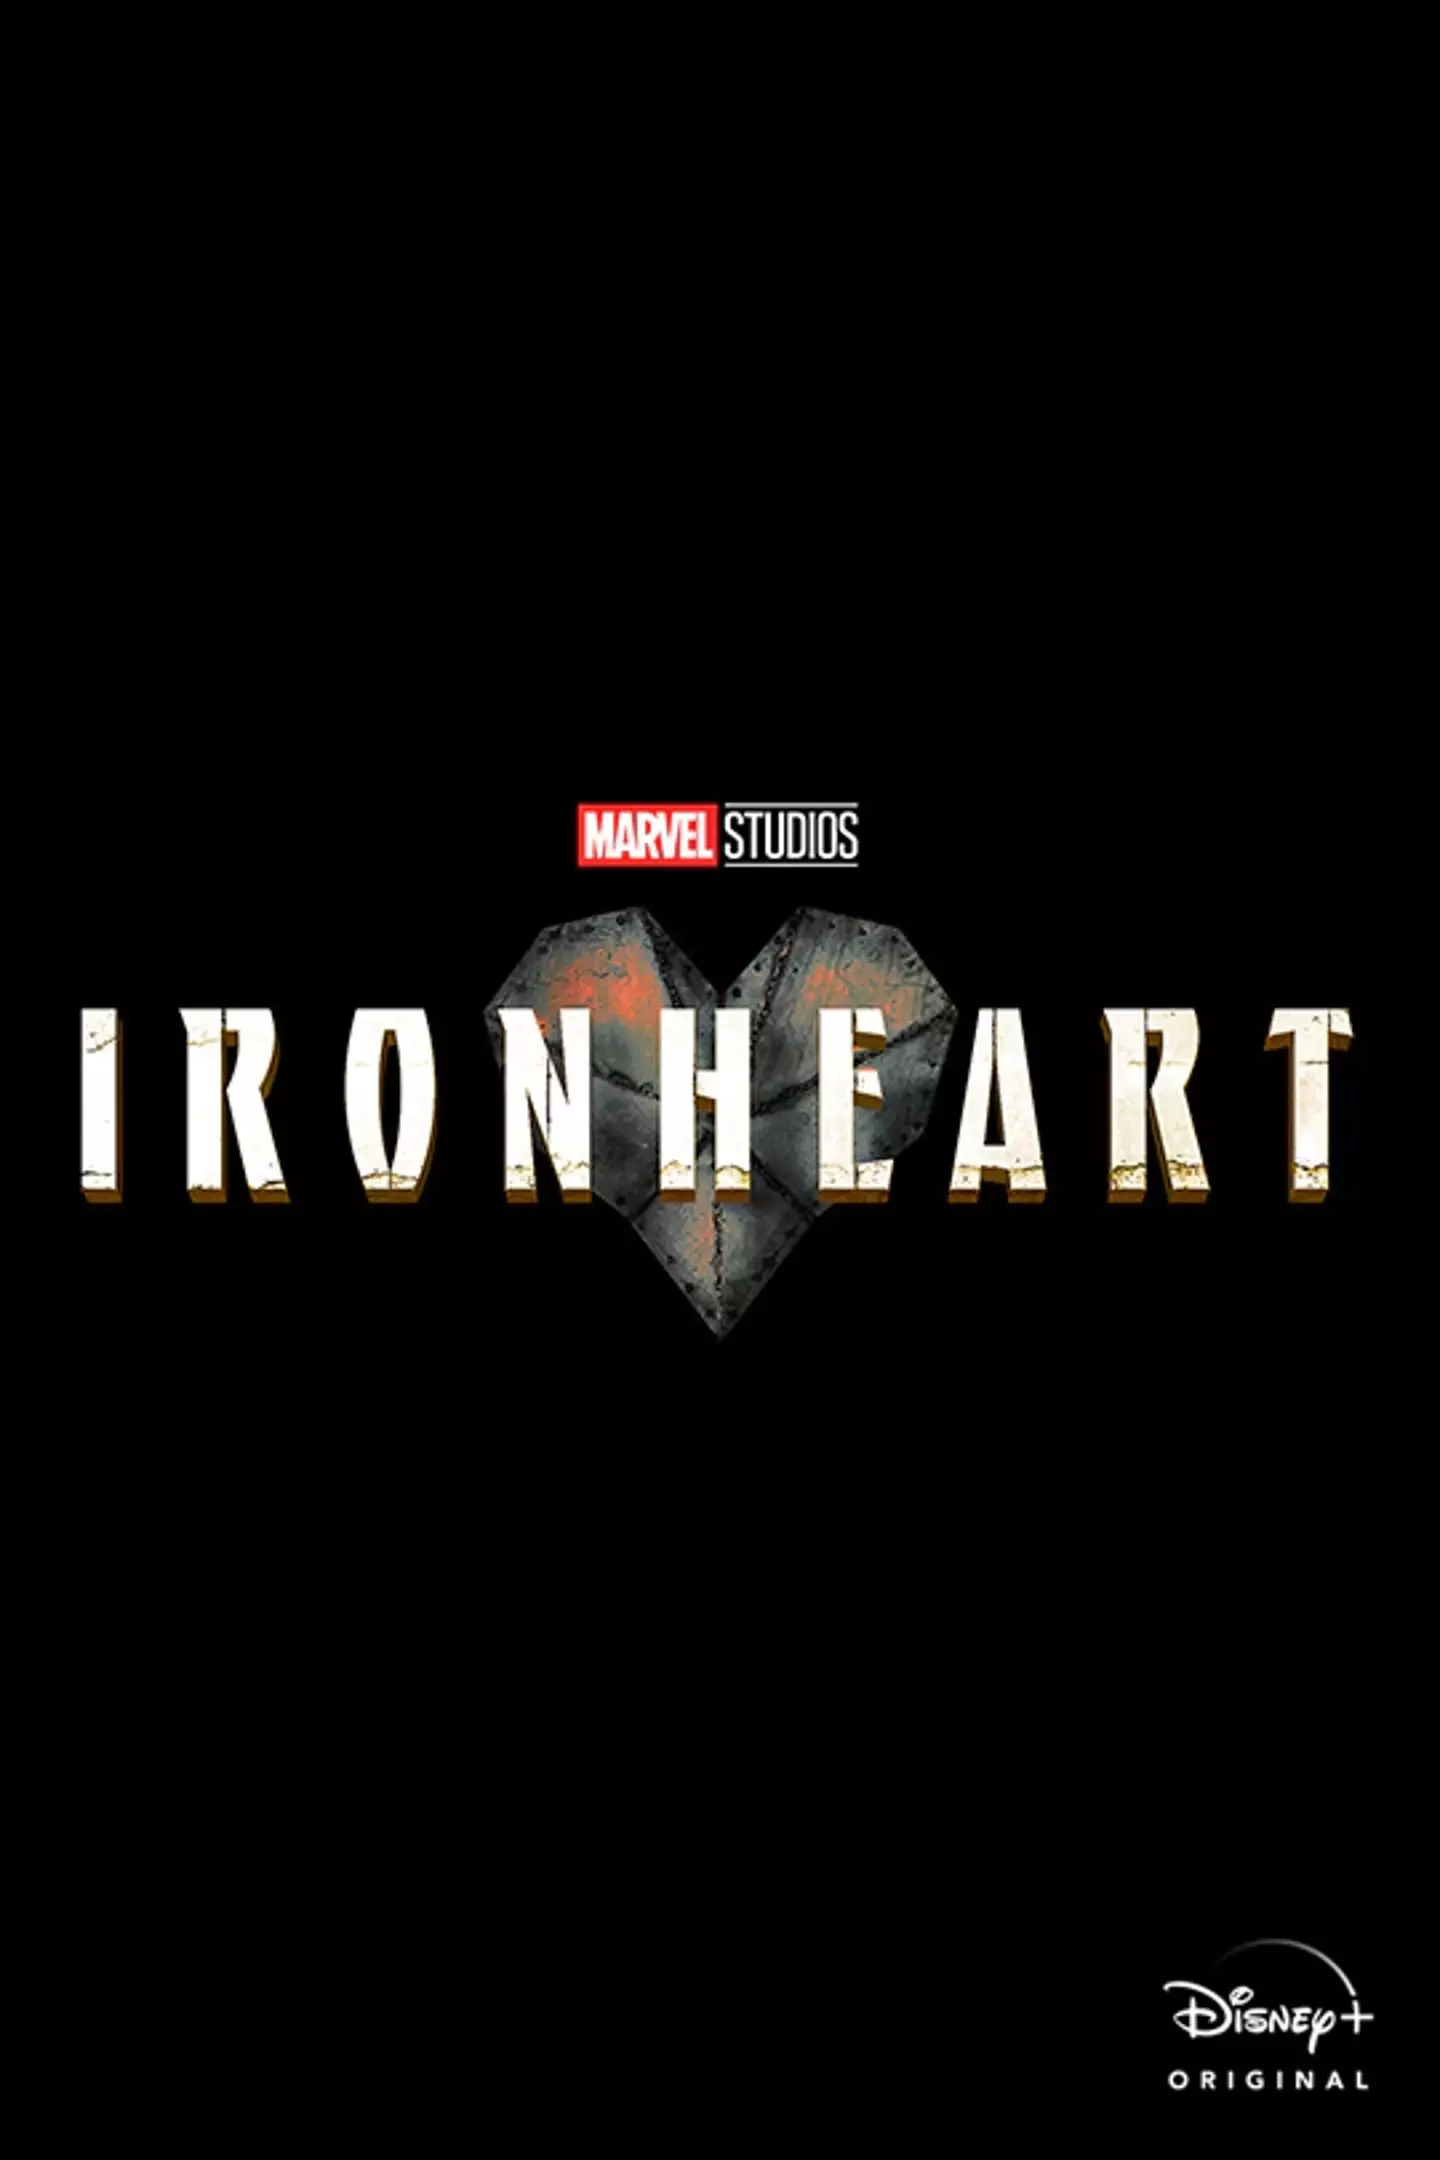 Ironheart will be released later this year.